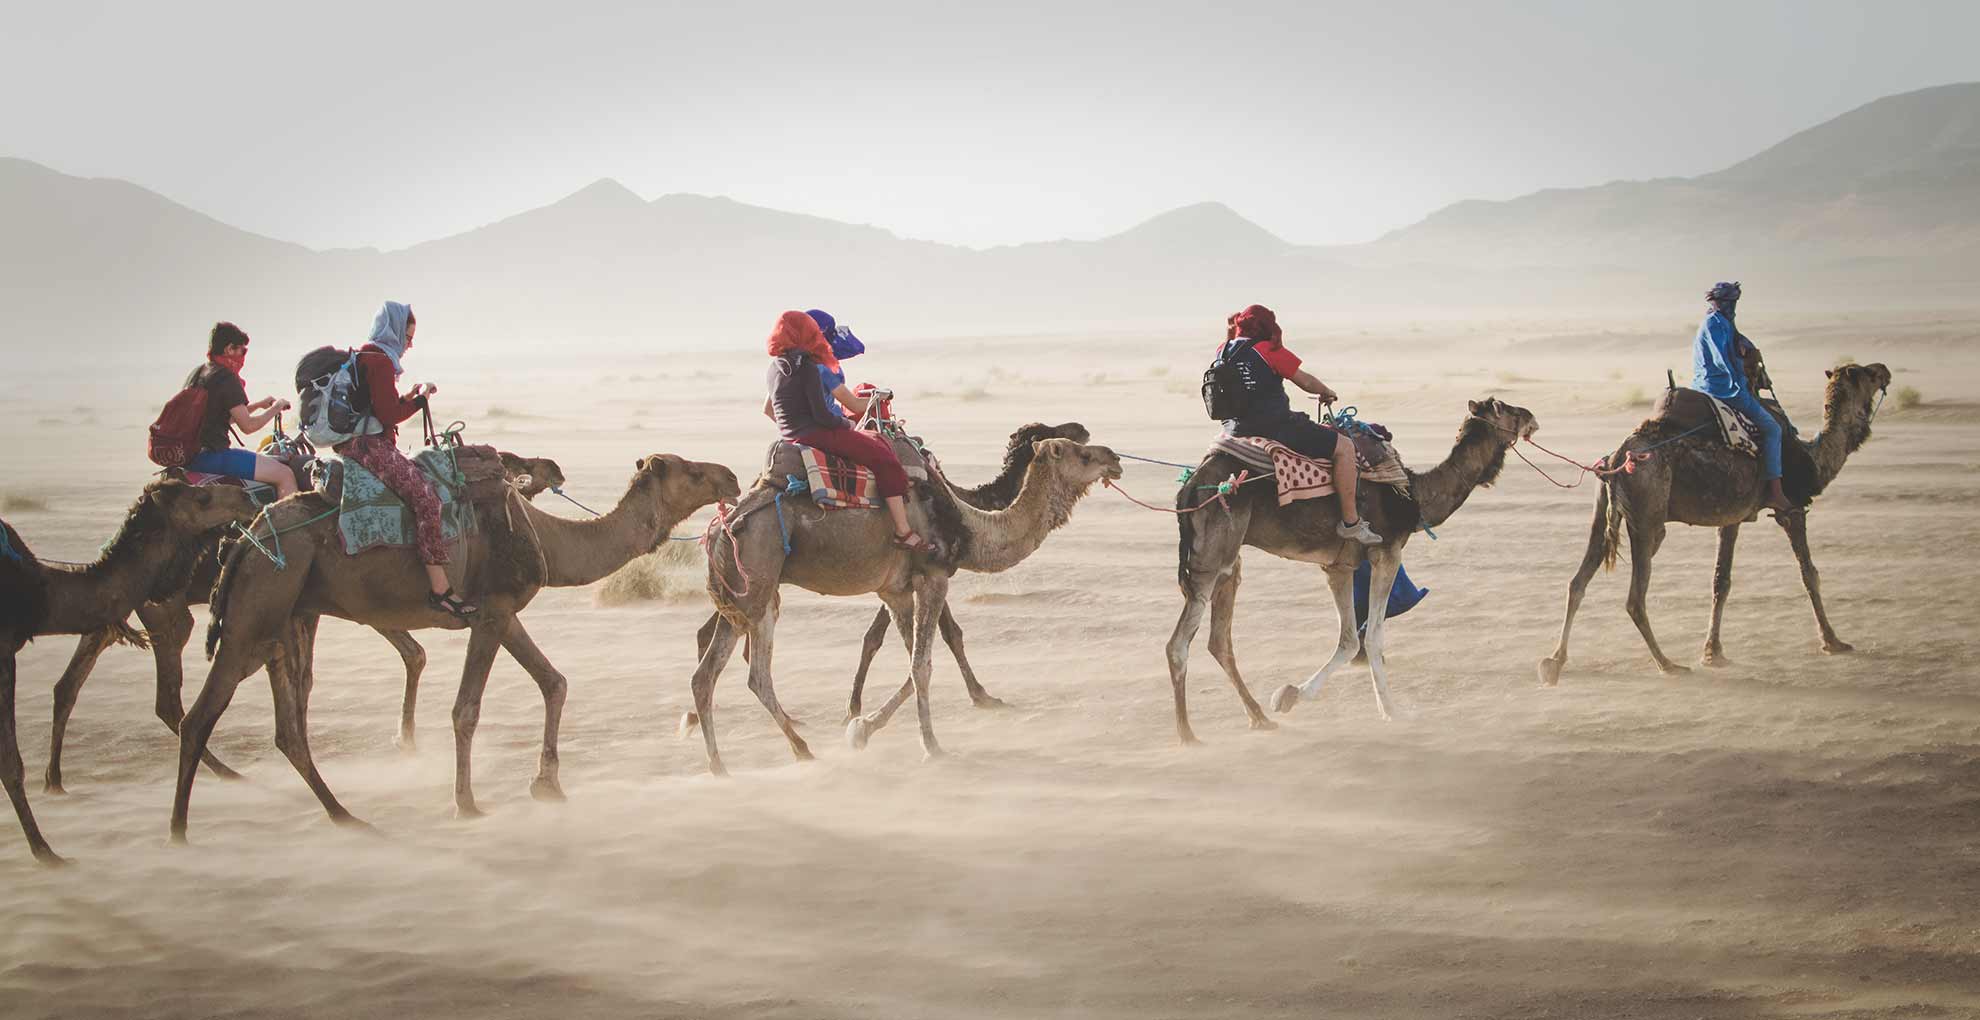 Students riding camels in desert